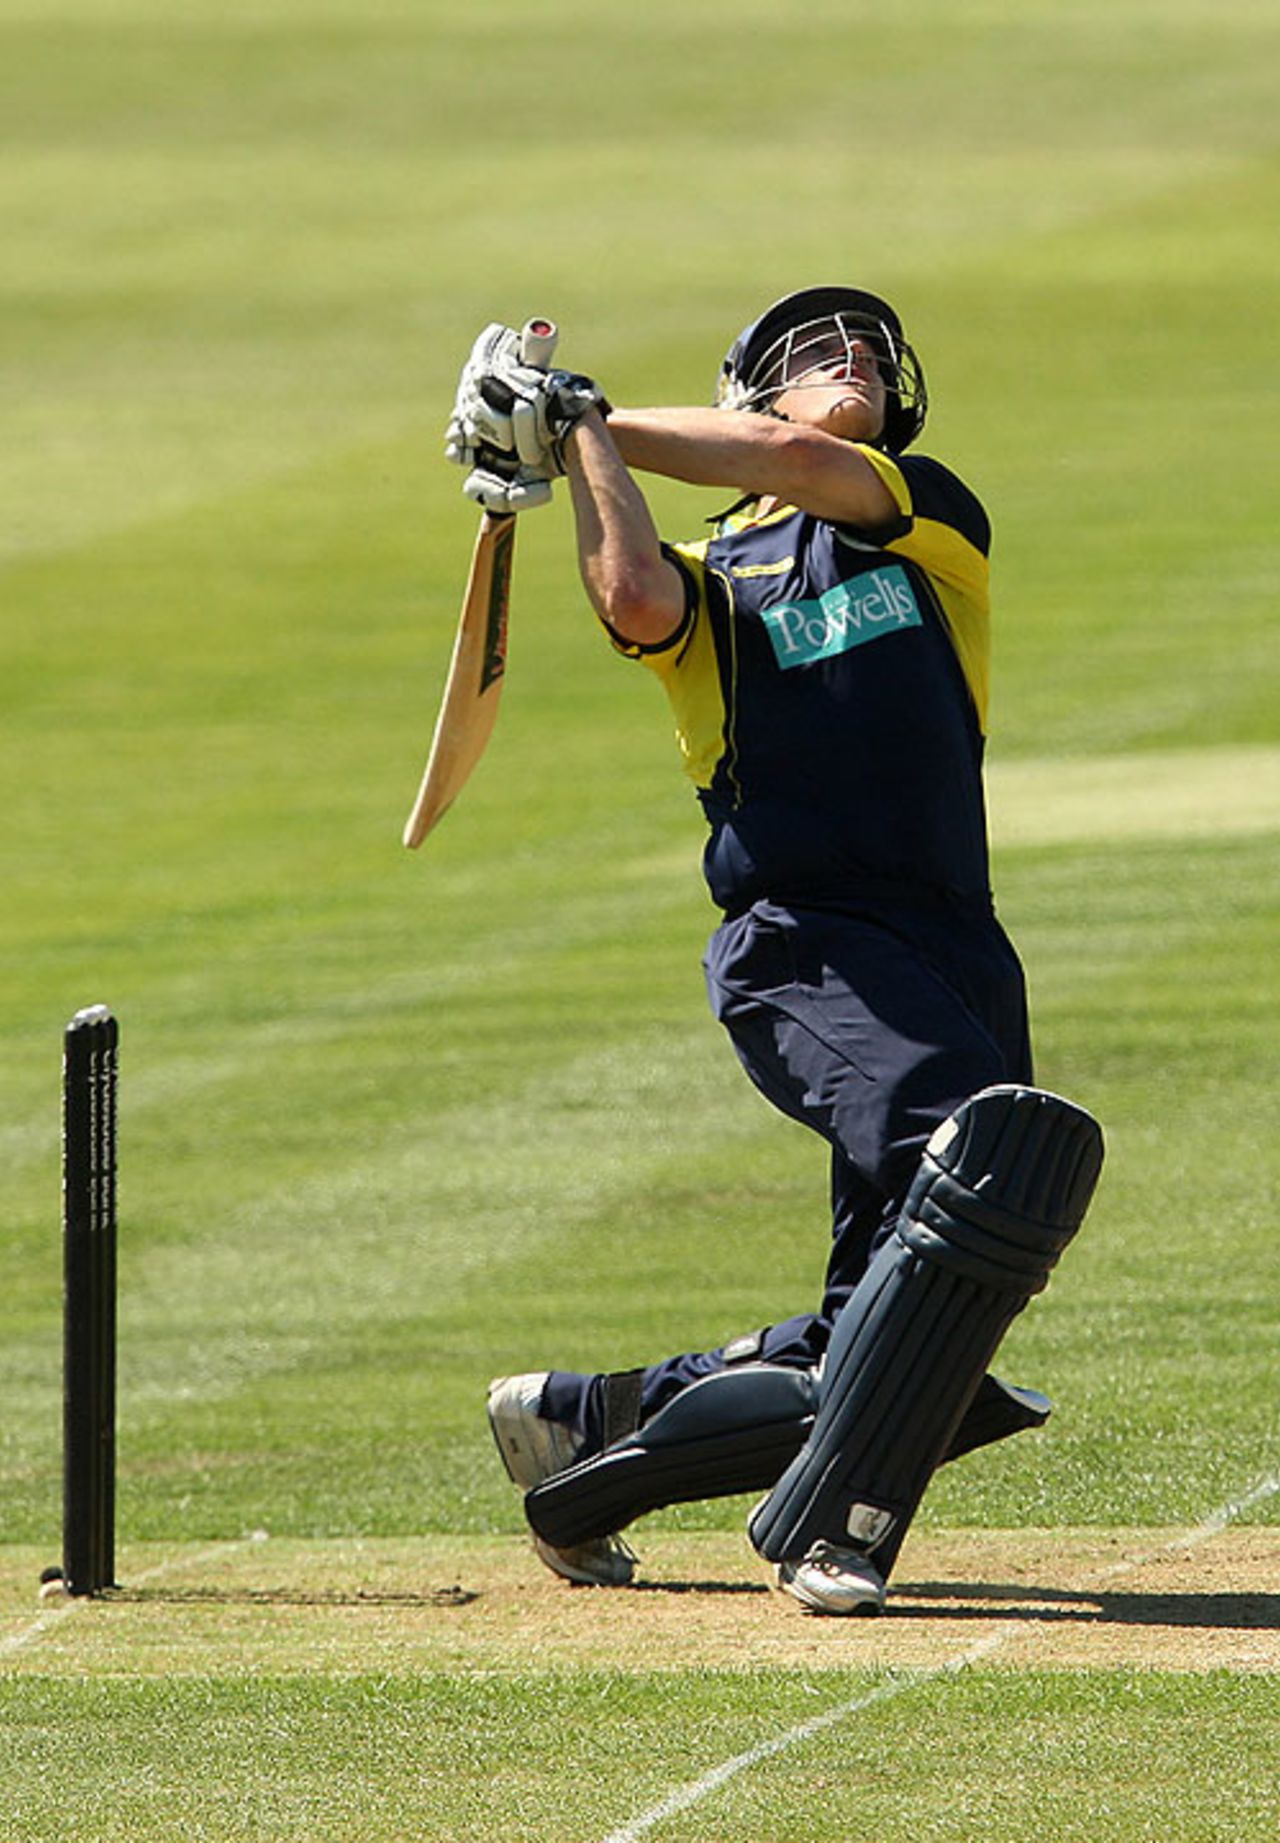 Hampshire's Jimmy Adams made 131 from 104 balls, Warwickshire v Hampshire, Clydesdale Bank 40, May 22, 2010